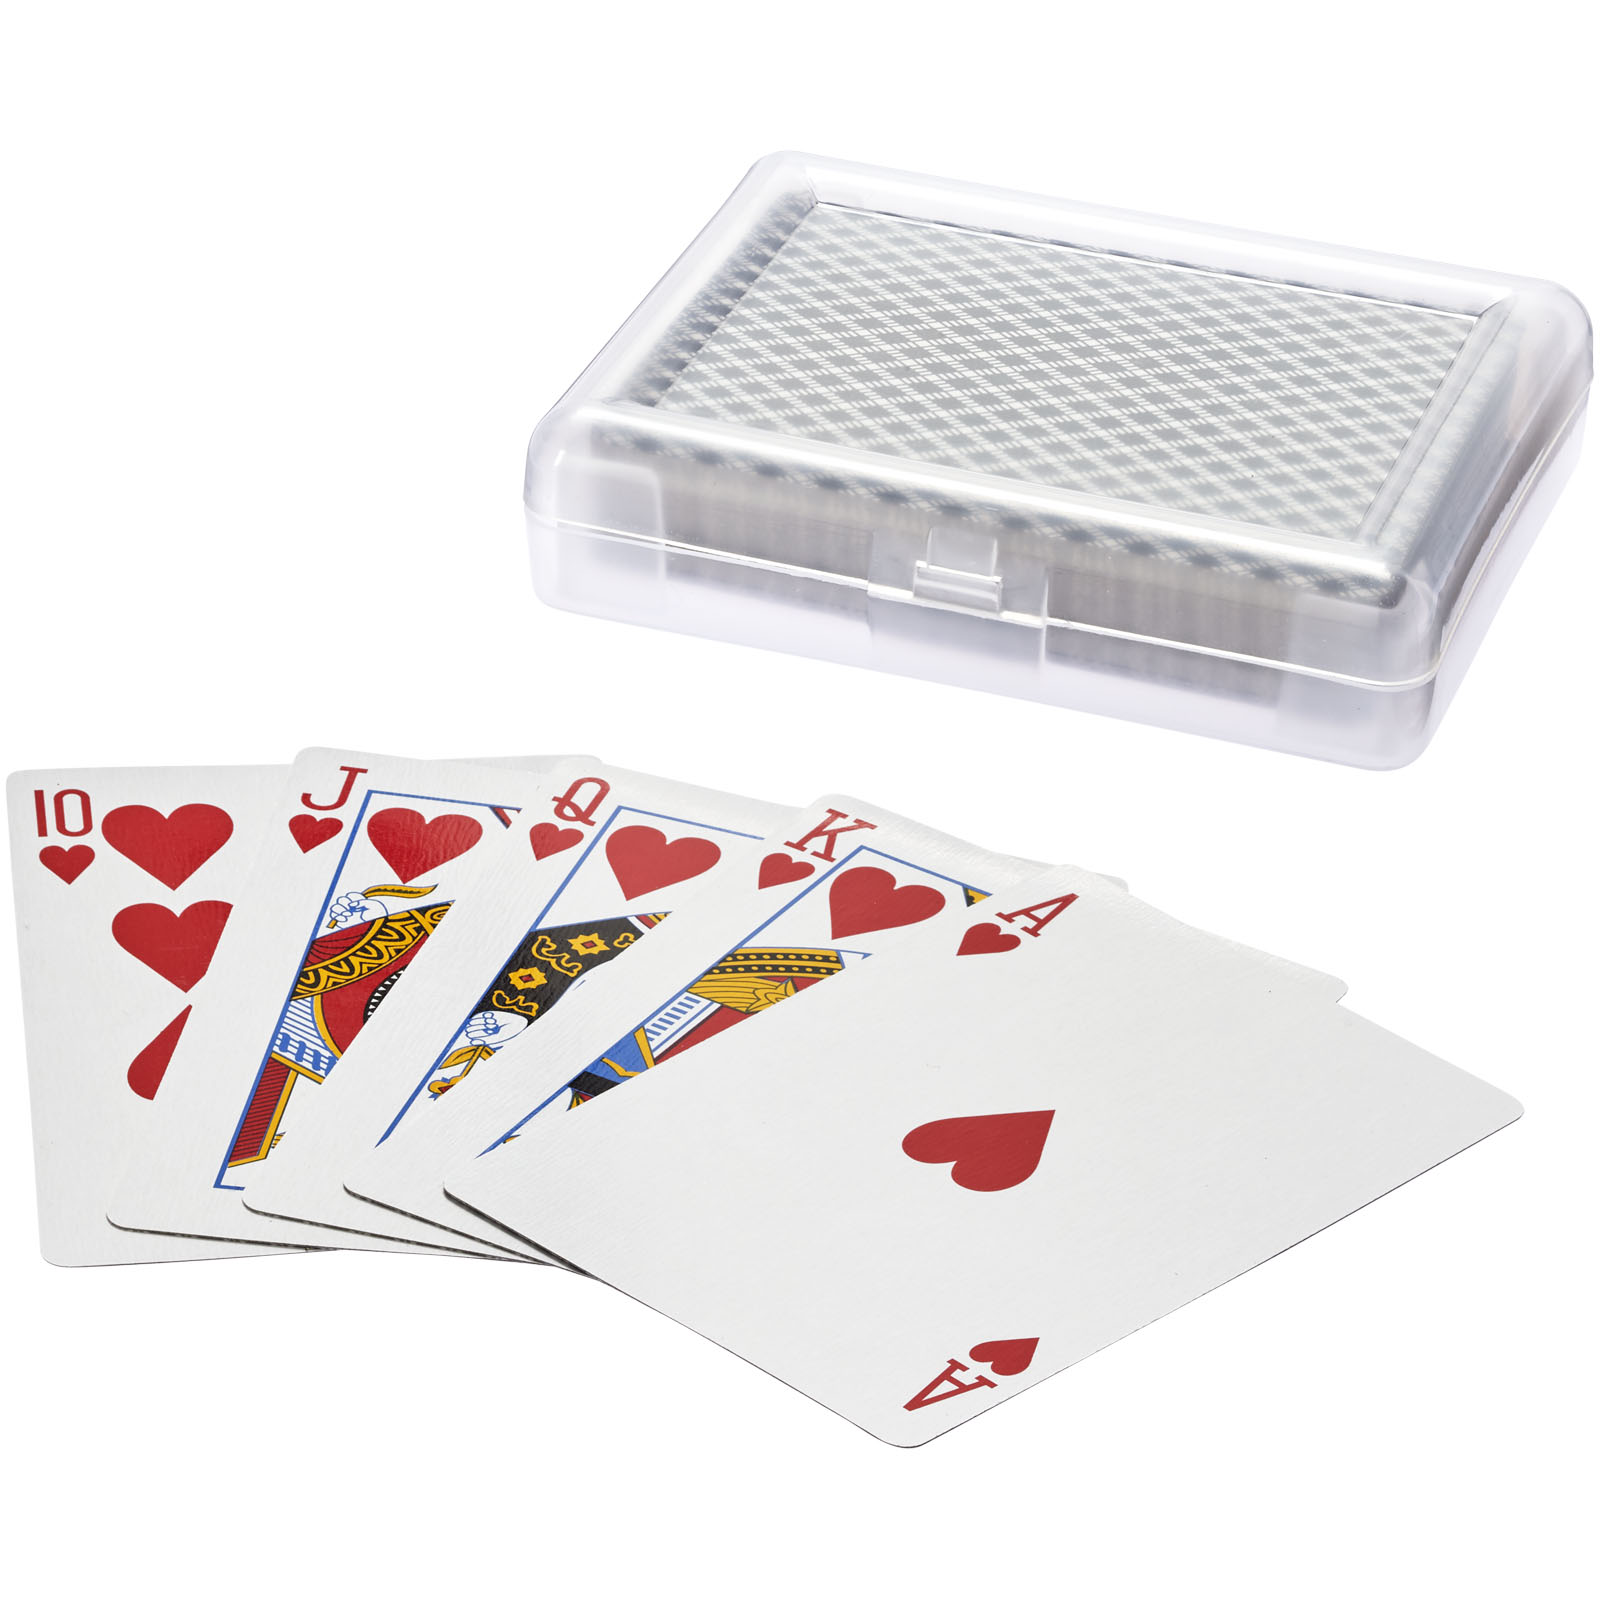 Advertising Indoor Games - Reno playing cards set in case